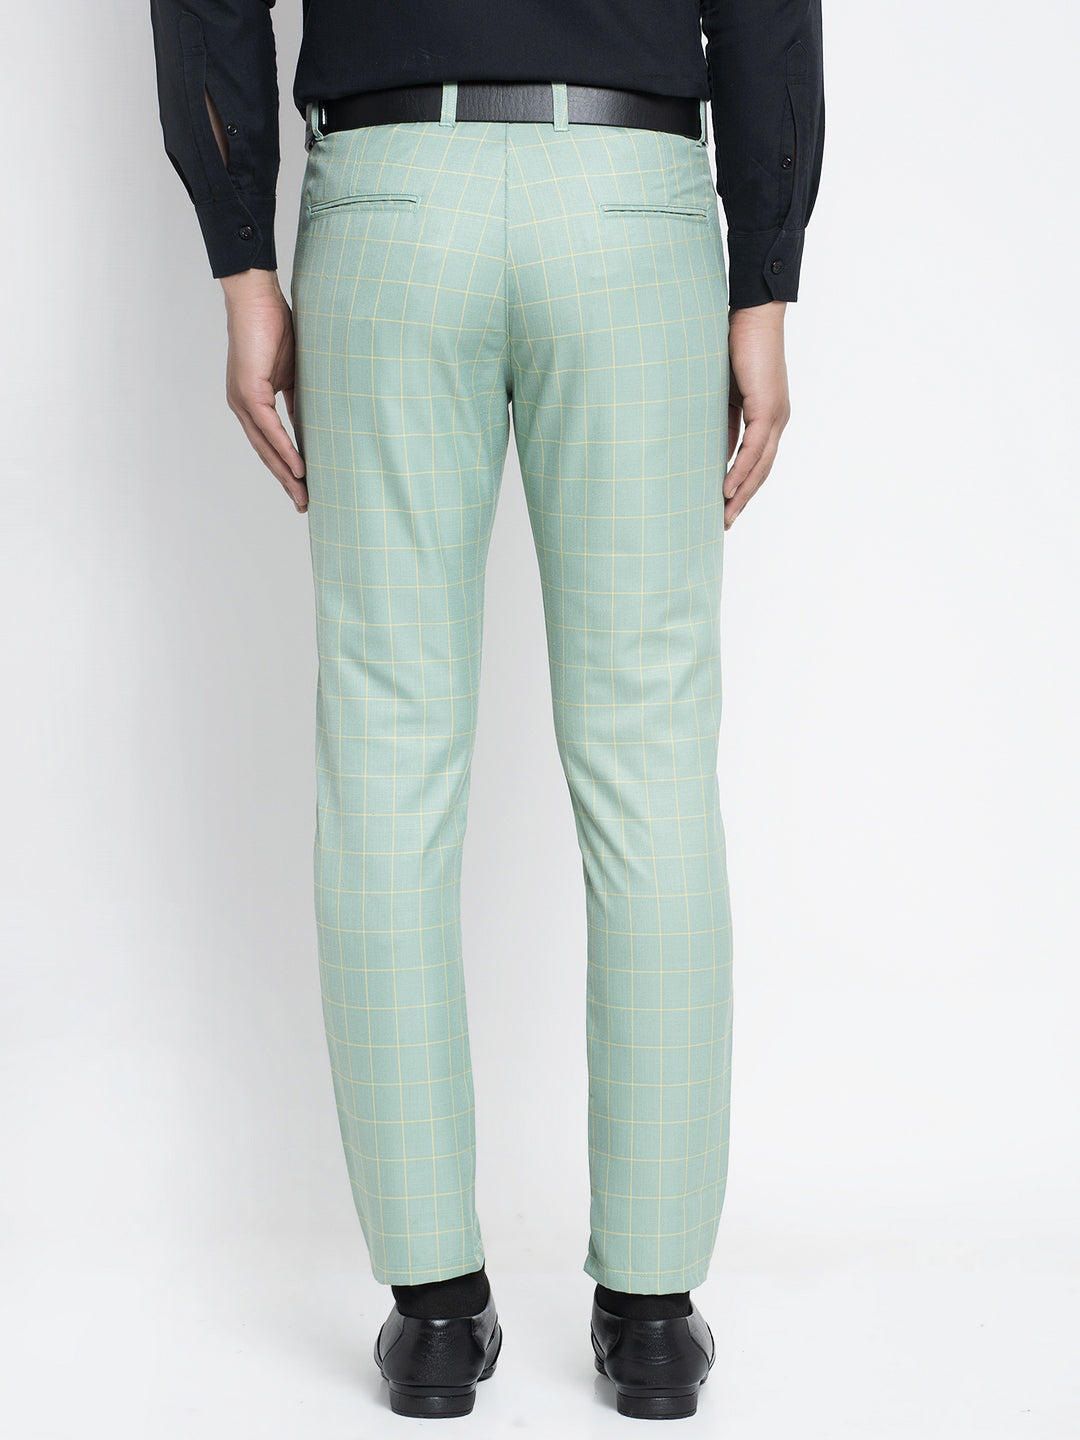 Scabal Oslo Green Wool Pants : Made To Measure Custom Jeans For Men &  Women, MakeYourOwnJeans®